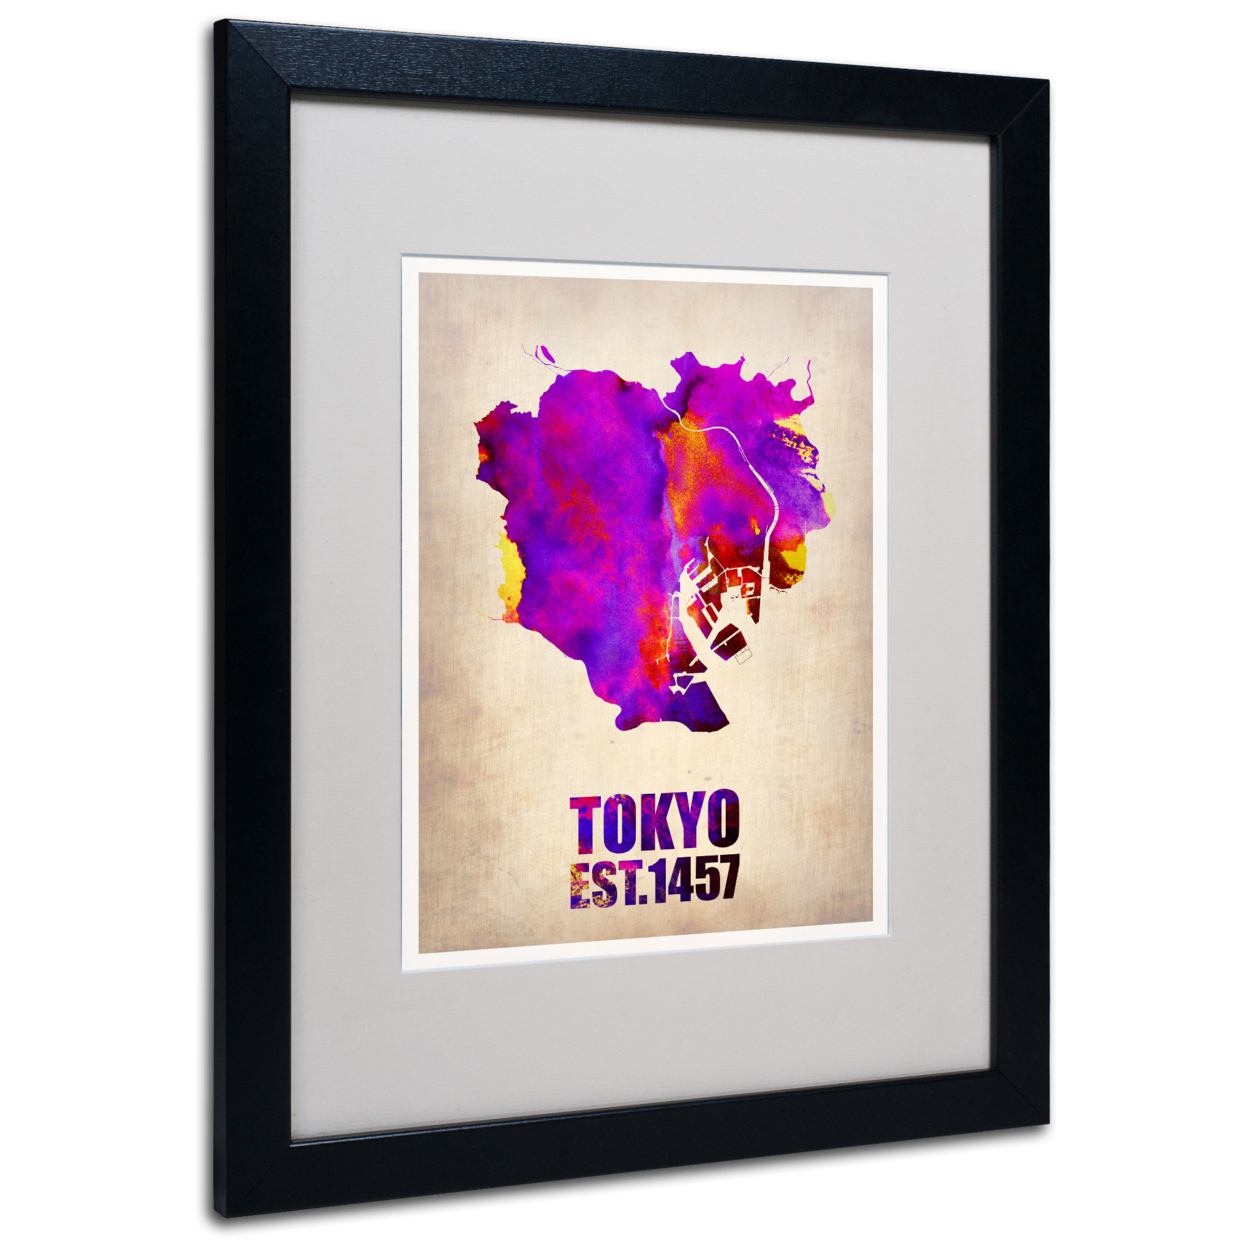 Naxart 'Tokyo Watercolor Map 2' Black Wooden Framed Art 18 X 22 Inches